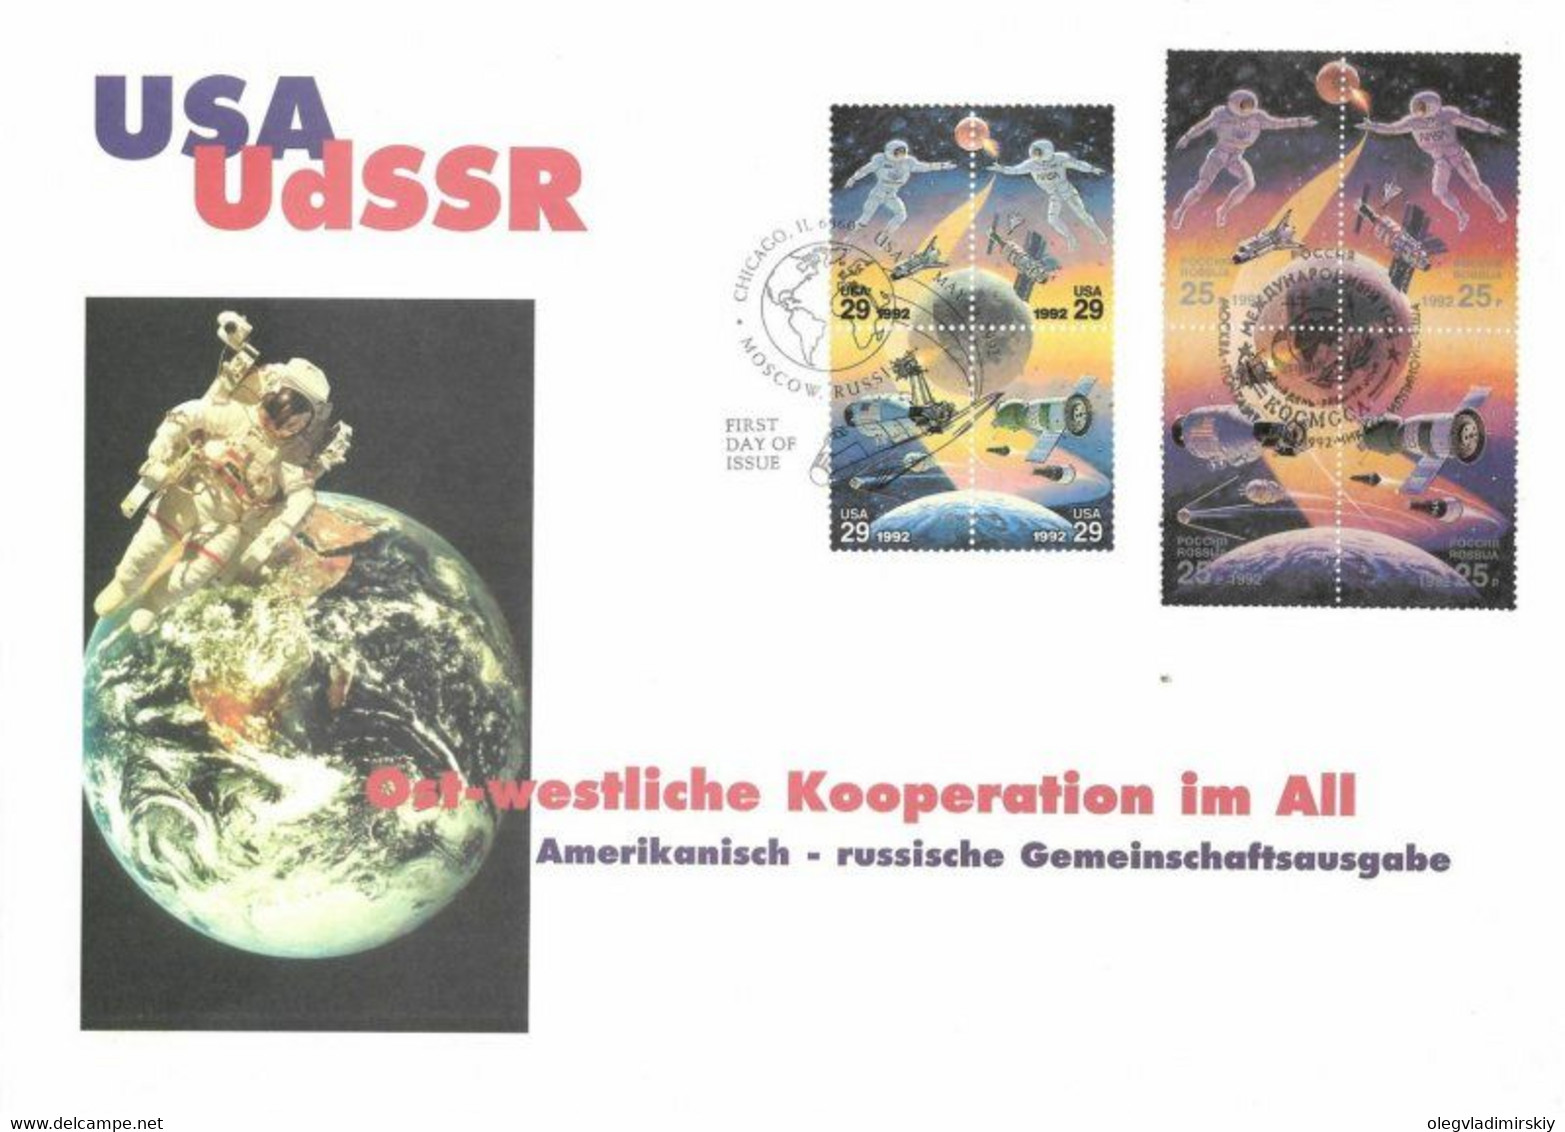 Russia USA 1992 Space Exploration Joint Issue Rare FDC With Cancellations Of Moscow And Chicago - América Del Norte